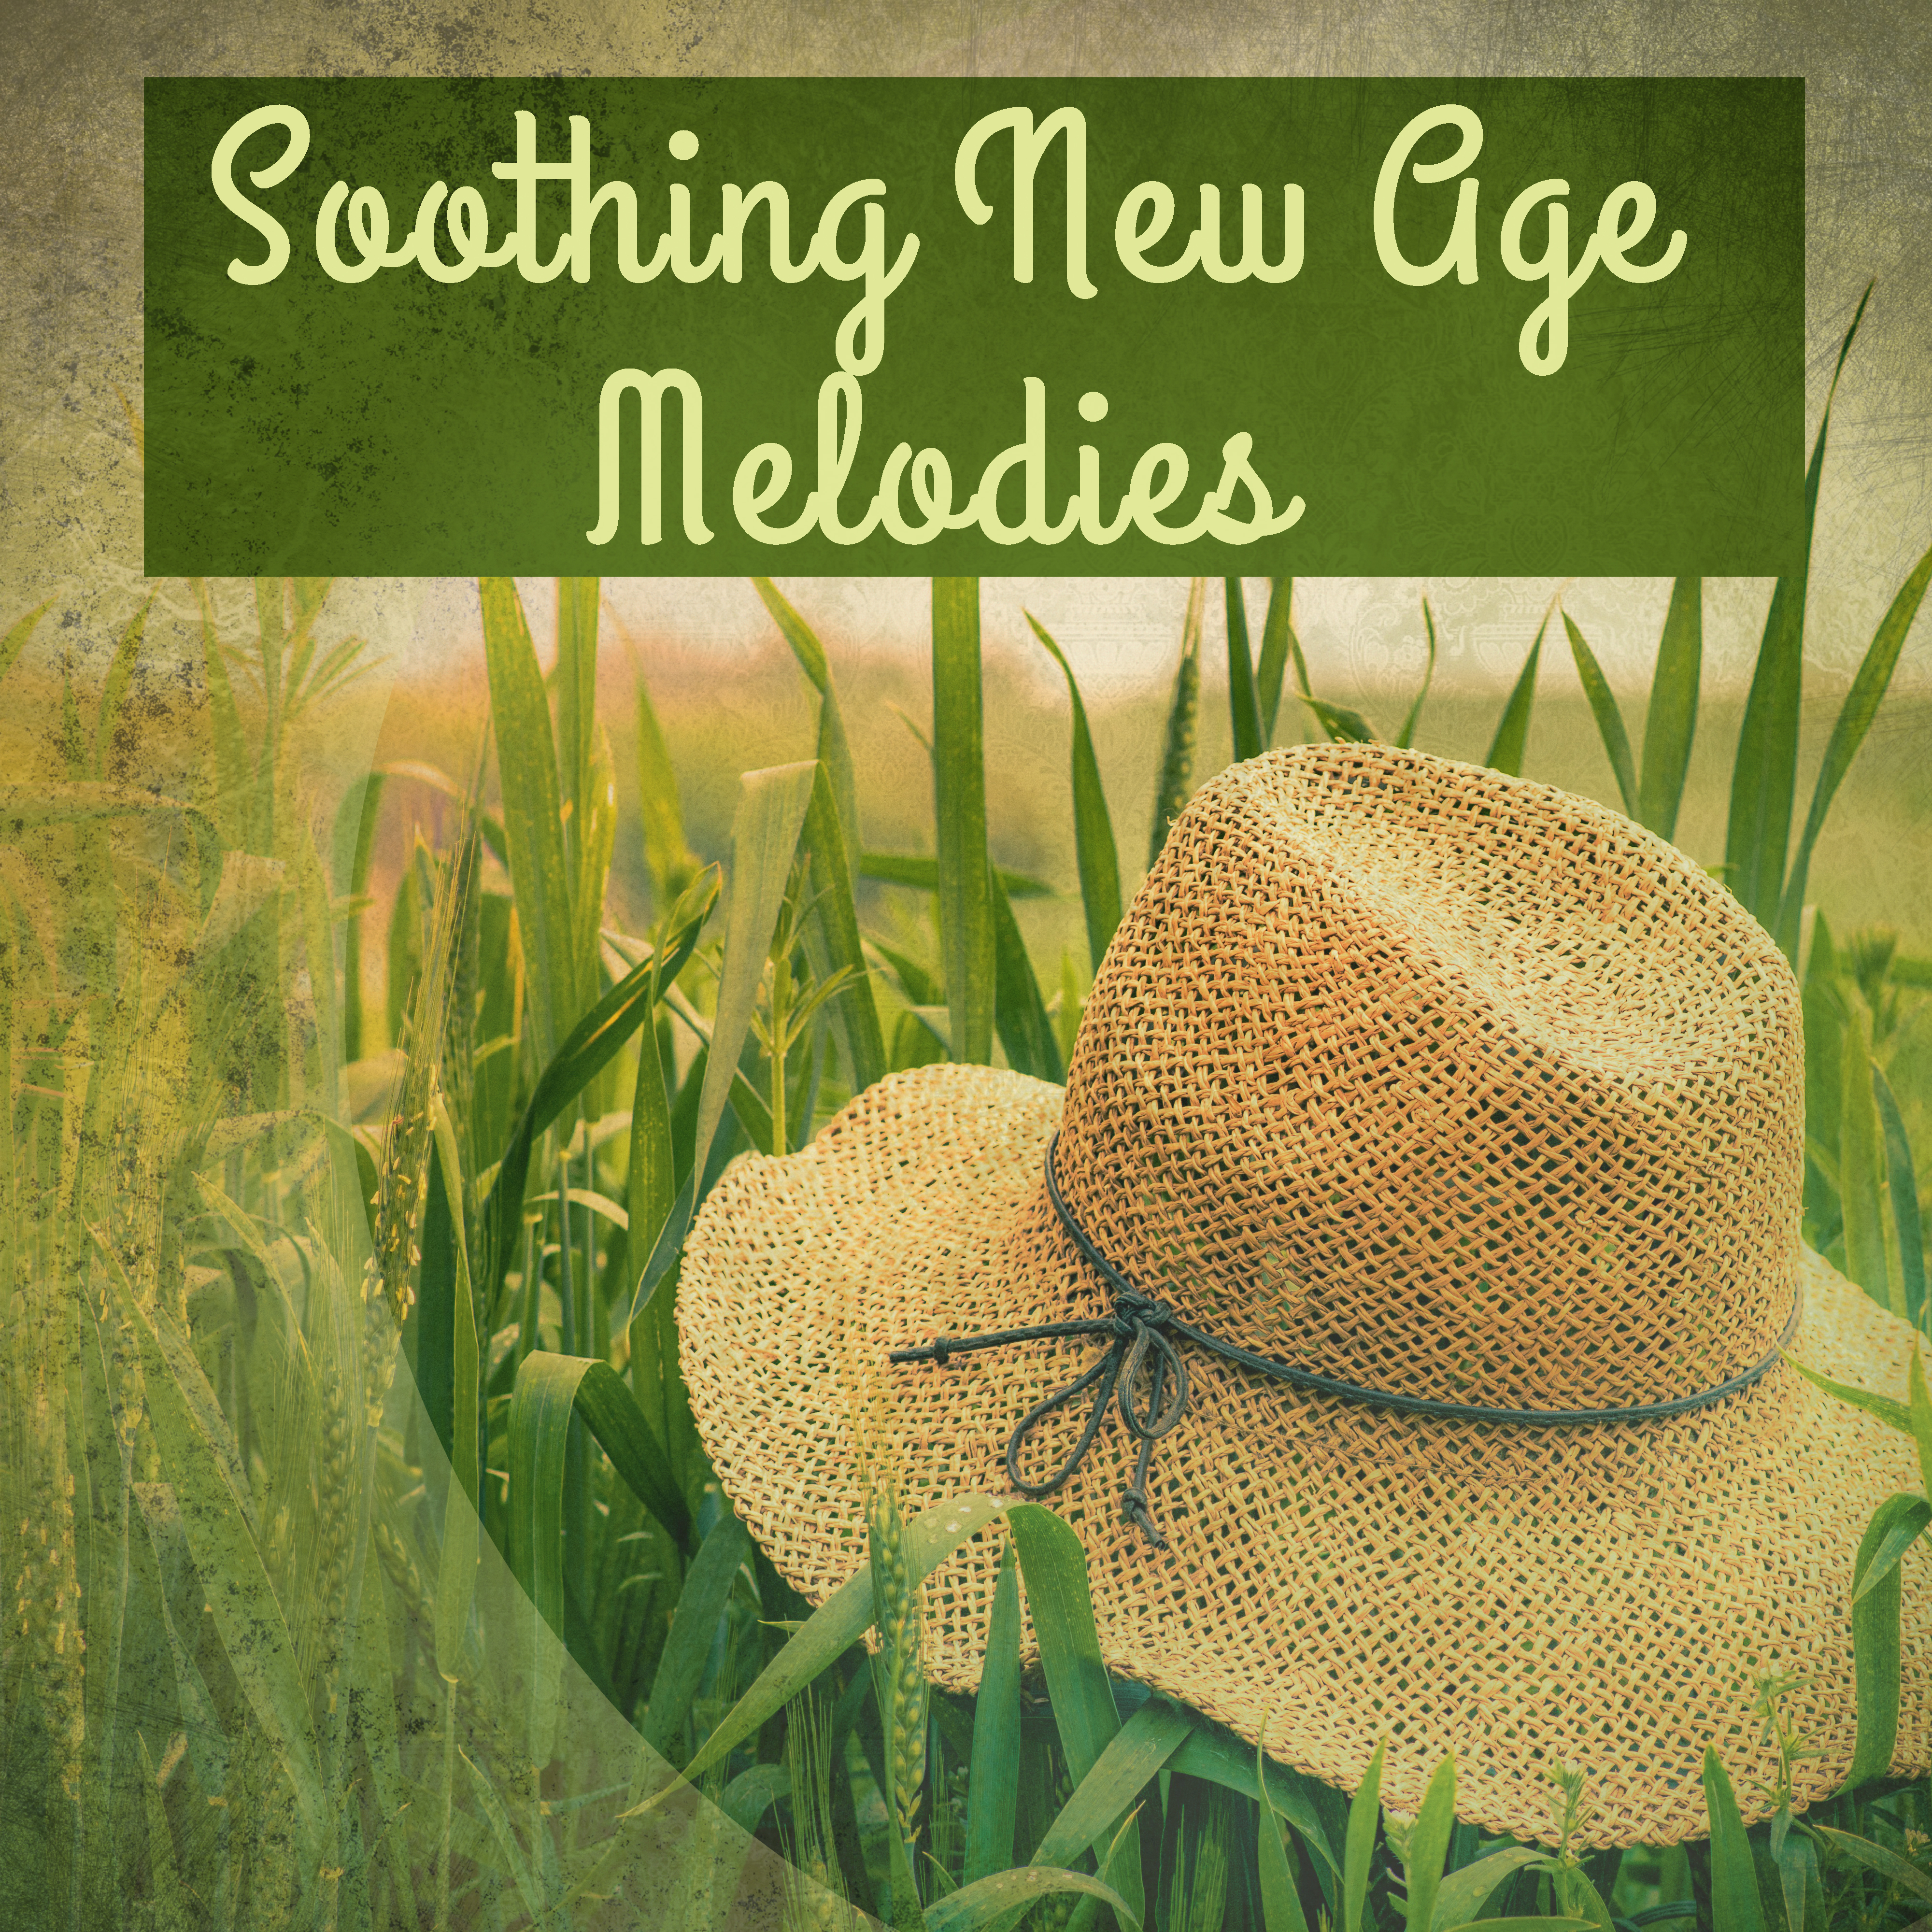 Soothing New Age Melodies  Calming Waves, Stress Relief, Nature Therapy, Peaceful Music